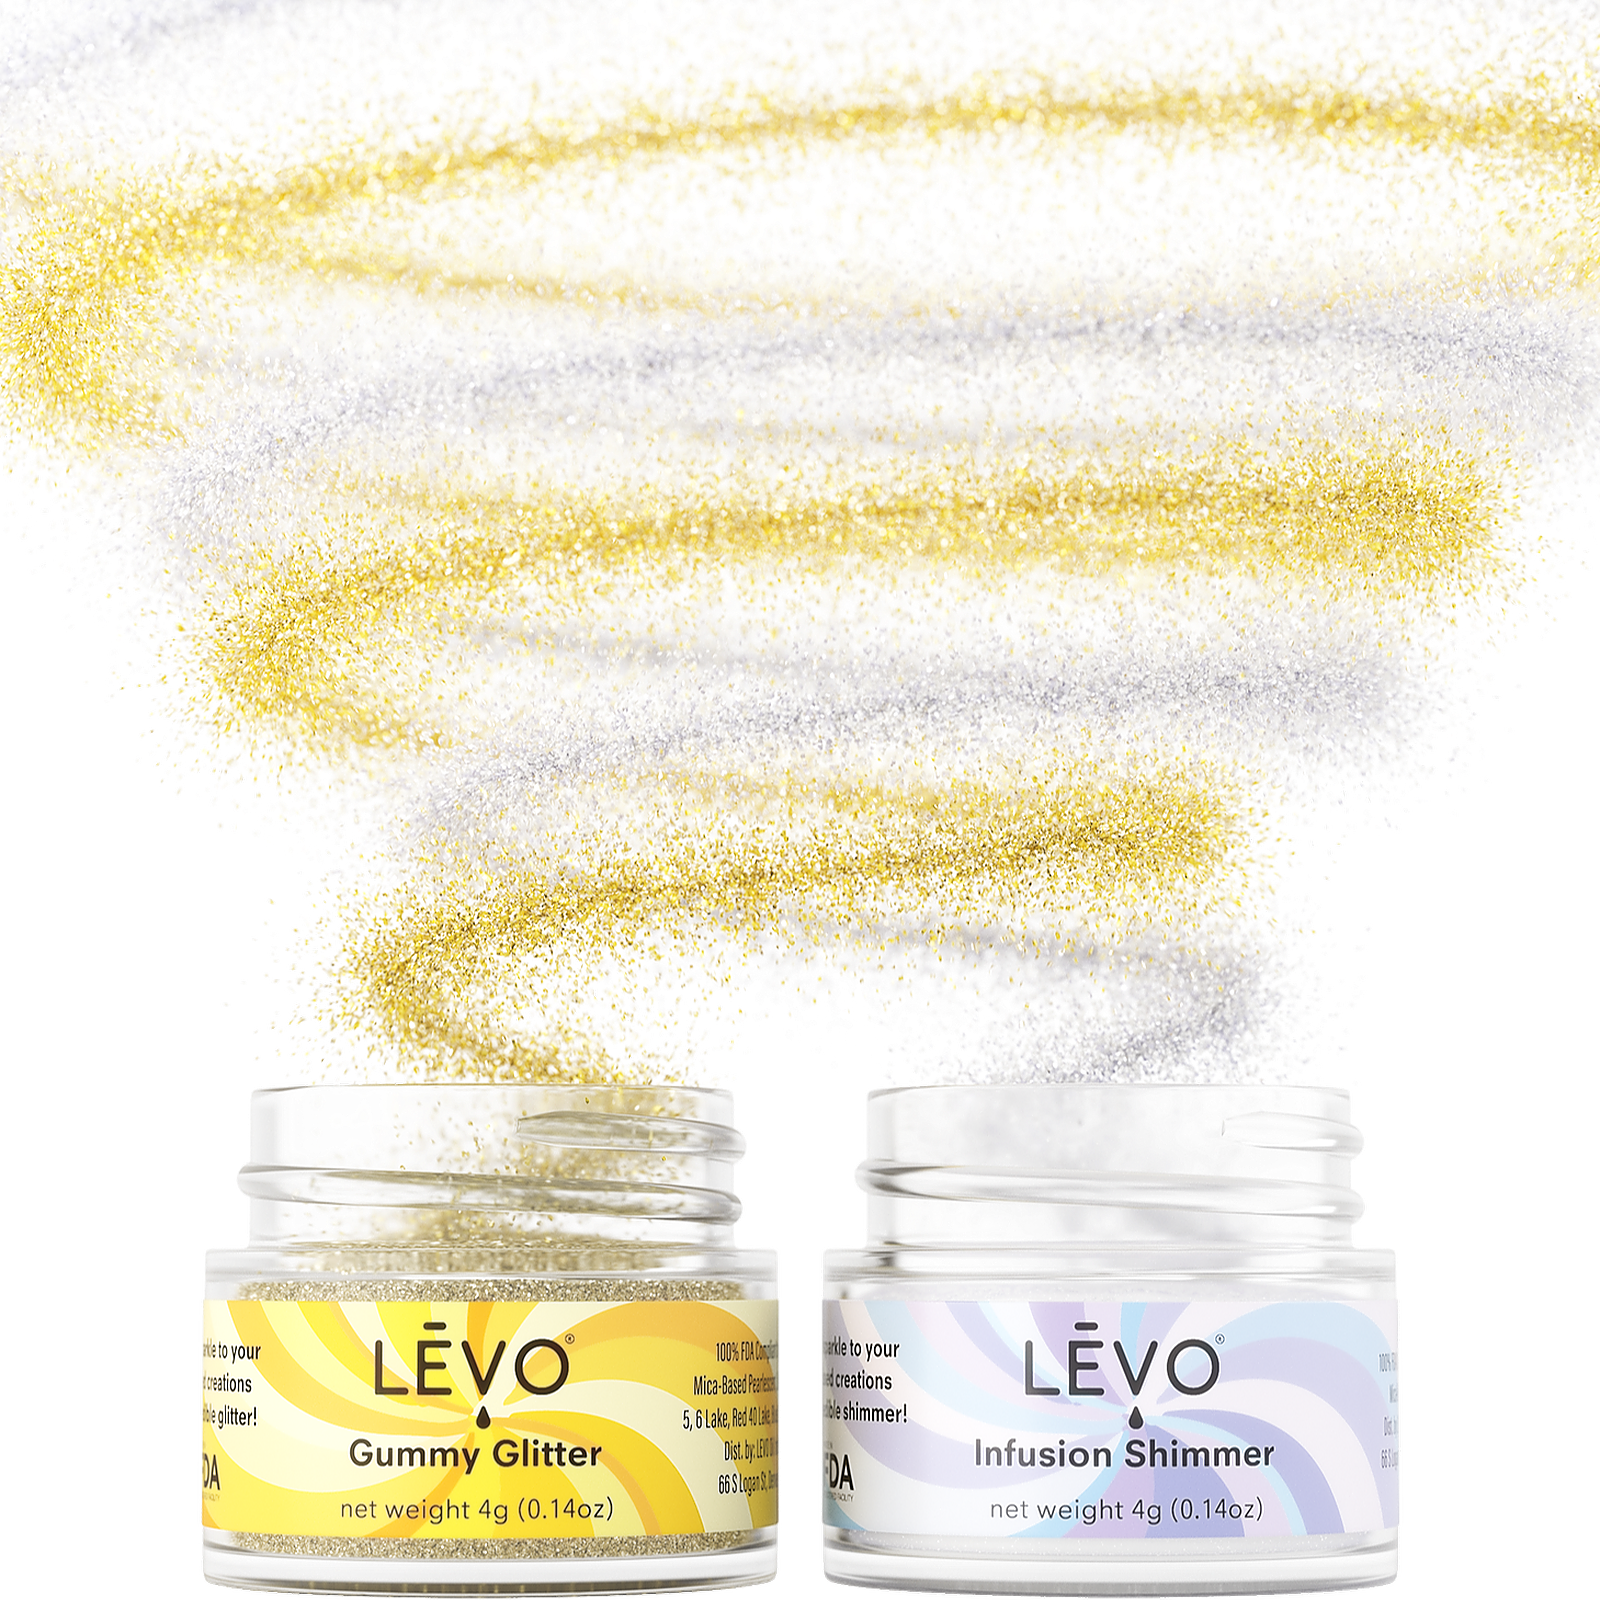 https://leafly-public.s3-us-west-2.amazonaws.com/products/photos/26CUwQ2RZWjVdw1Fughq_LEVO_GLITTER_SHIMMER_SHOT_01.png